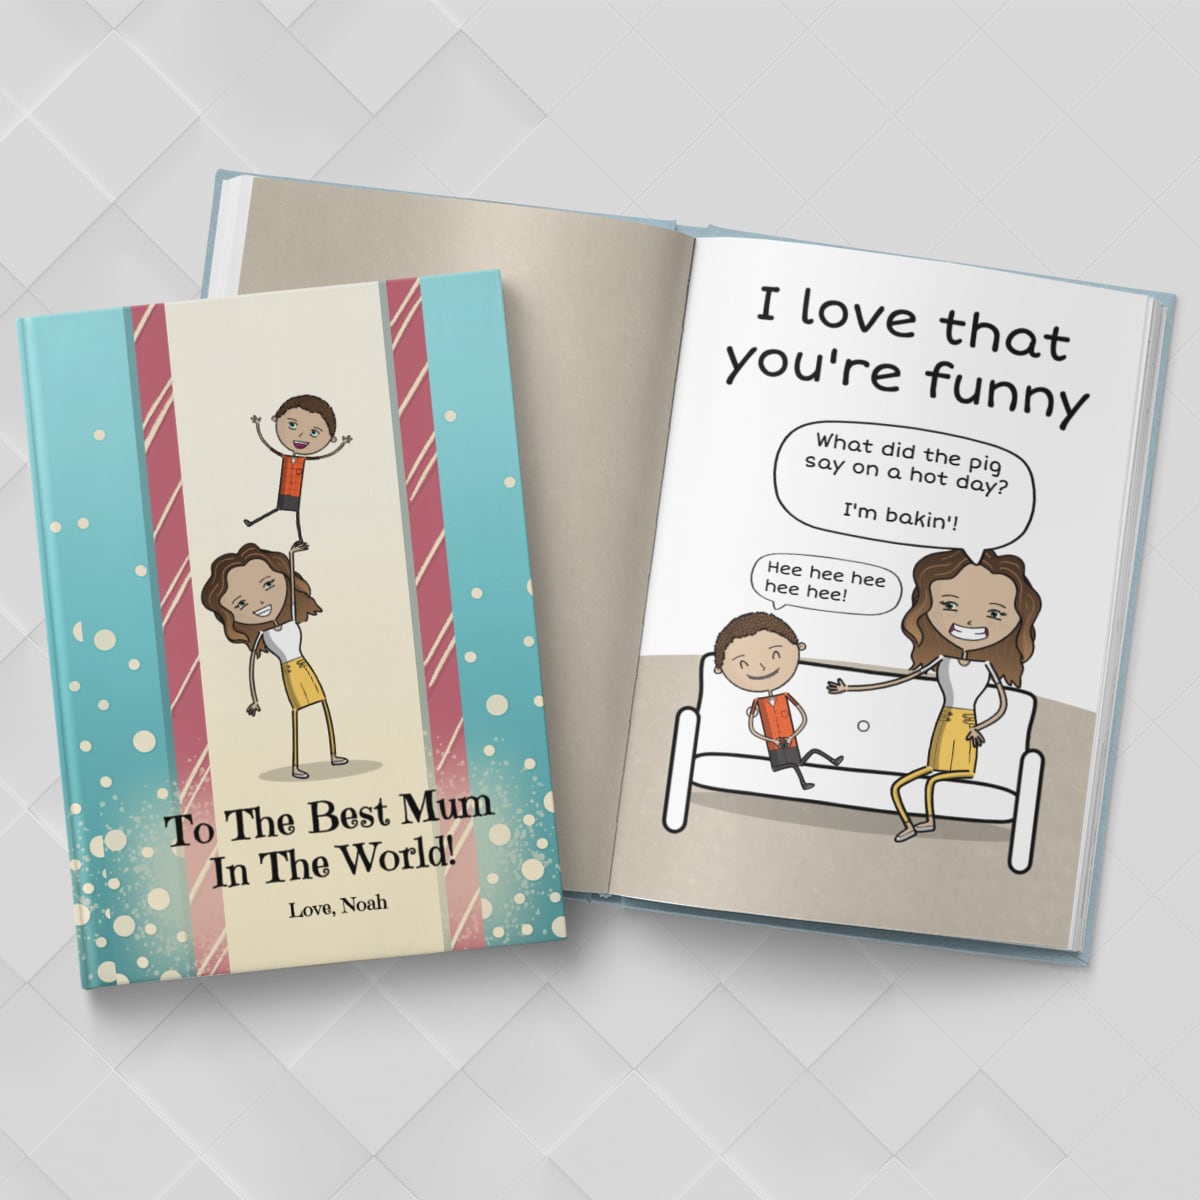 The Unique Personalized Gift Book That Says I Love You | LoveBook - 0